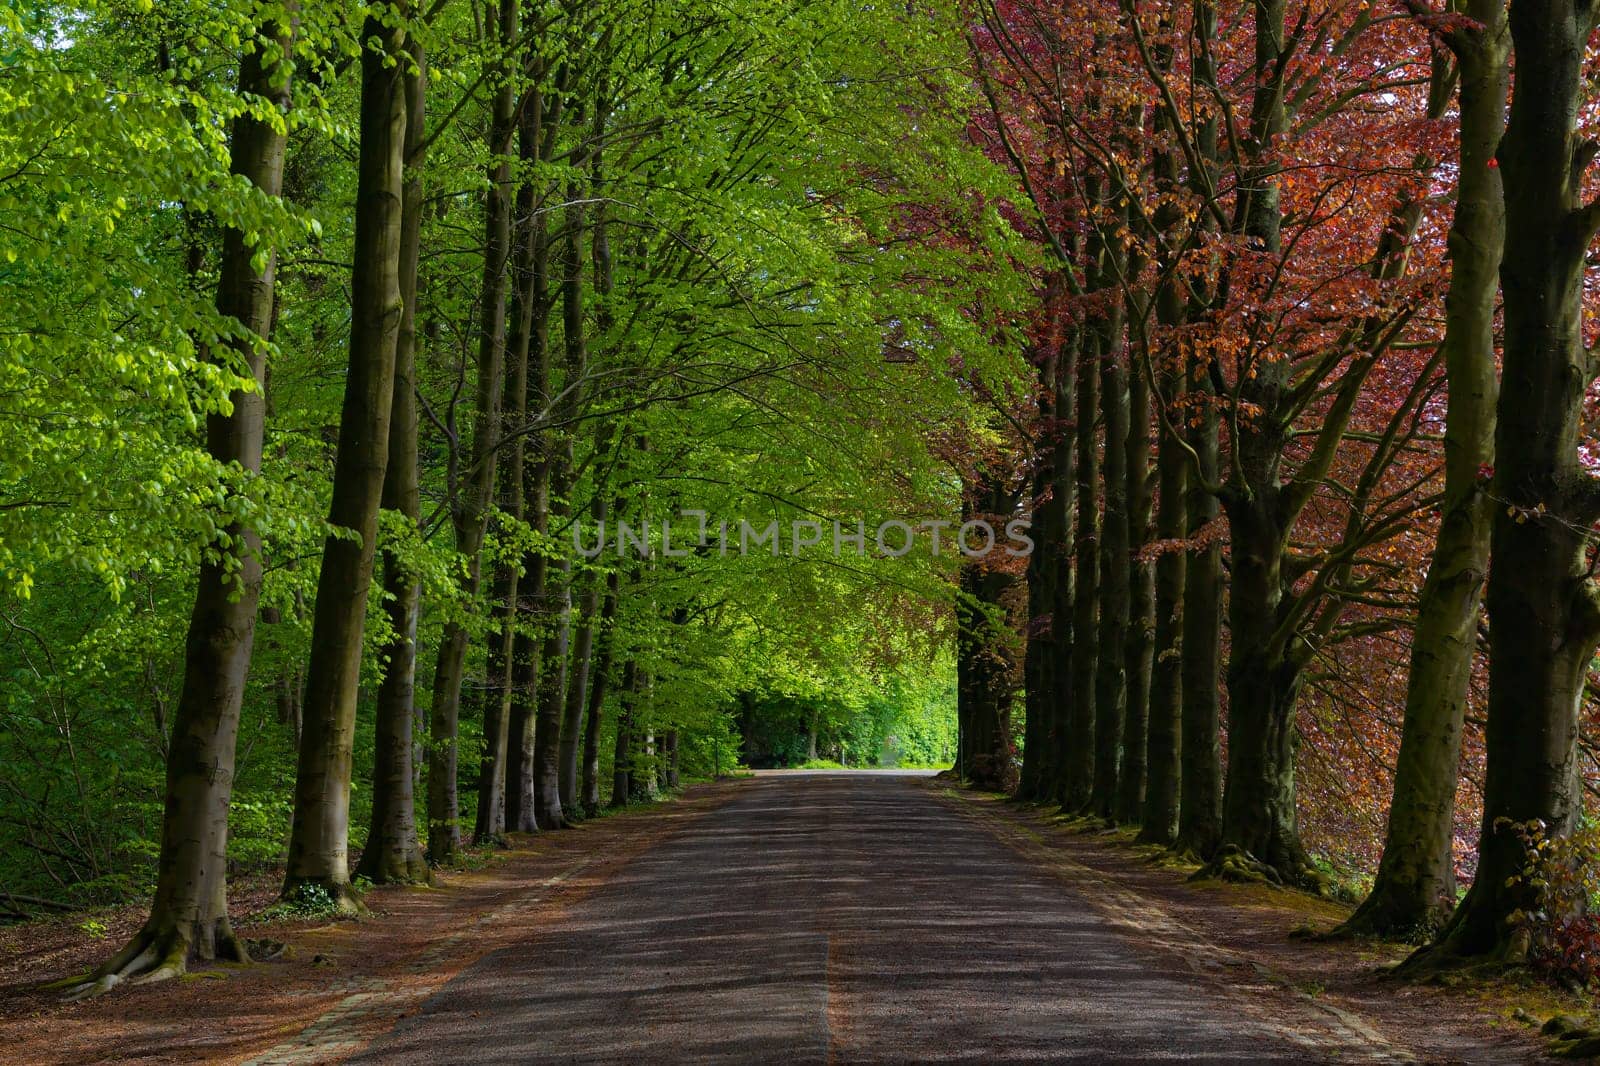 A road lined with trees is shown in the image. The trees are green and brown, with some leaves still on them. The road is empty, and the trees are lined up in a row, creating a sense of calm